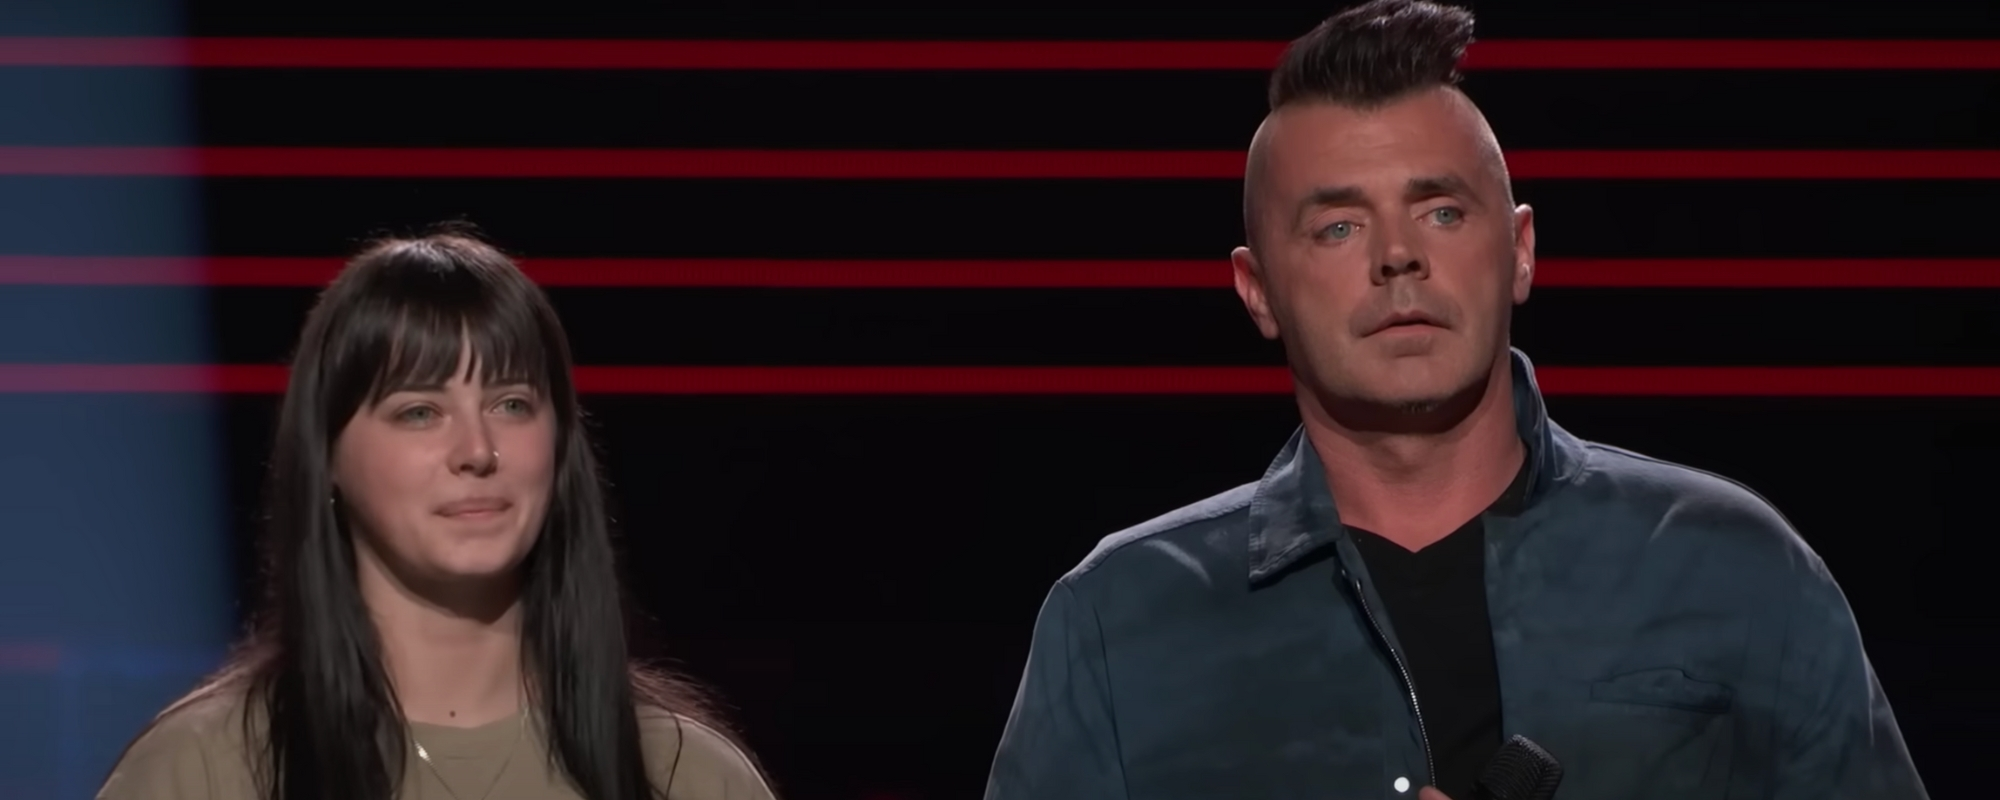 ‘The Voice’ Judges Surrender Their Chair After Bryan Olesen’s Daughter Joins Him for Duet